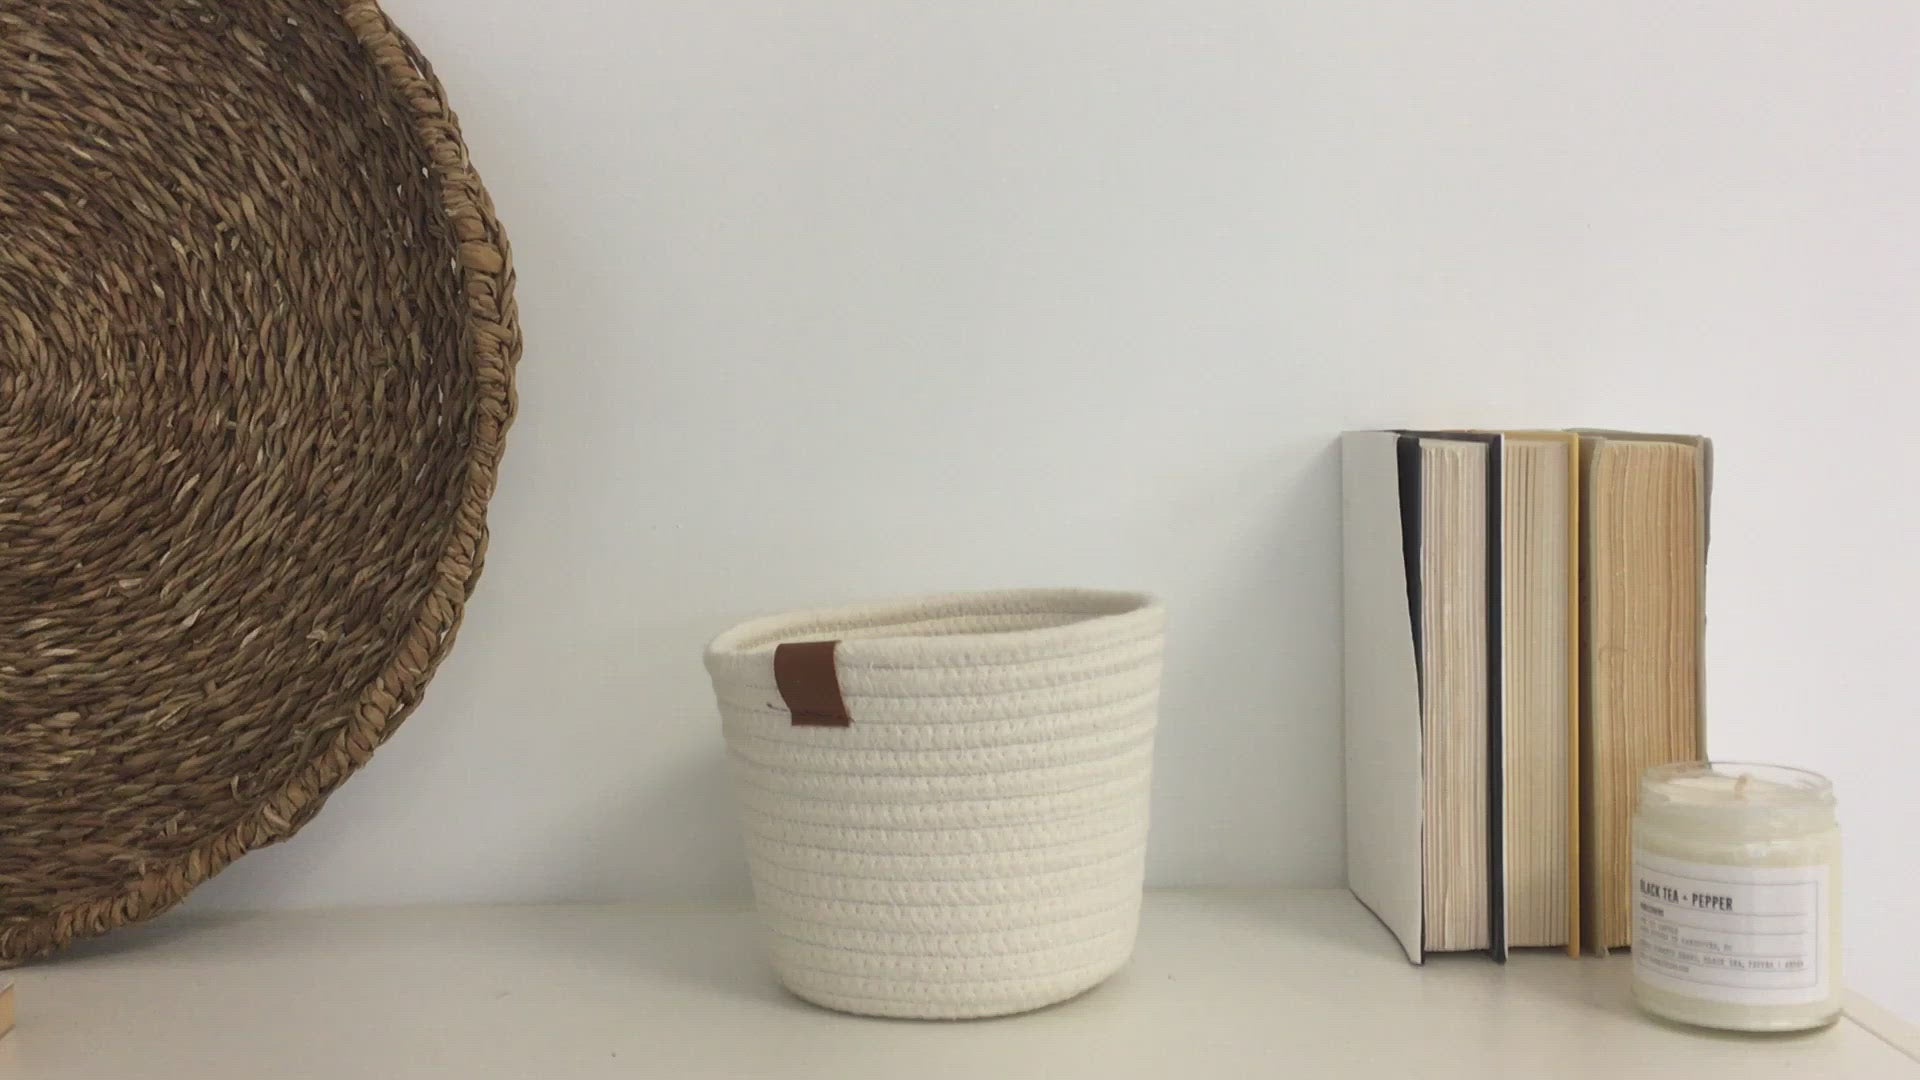 Off White Cotton Rope Plant Basket with Leather Accent